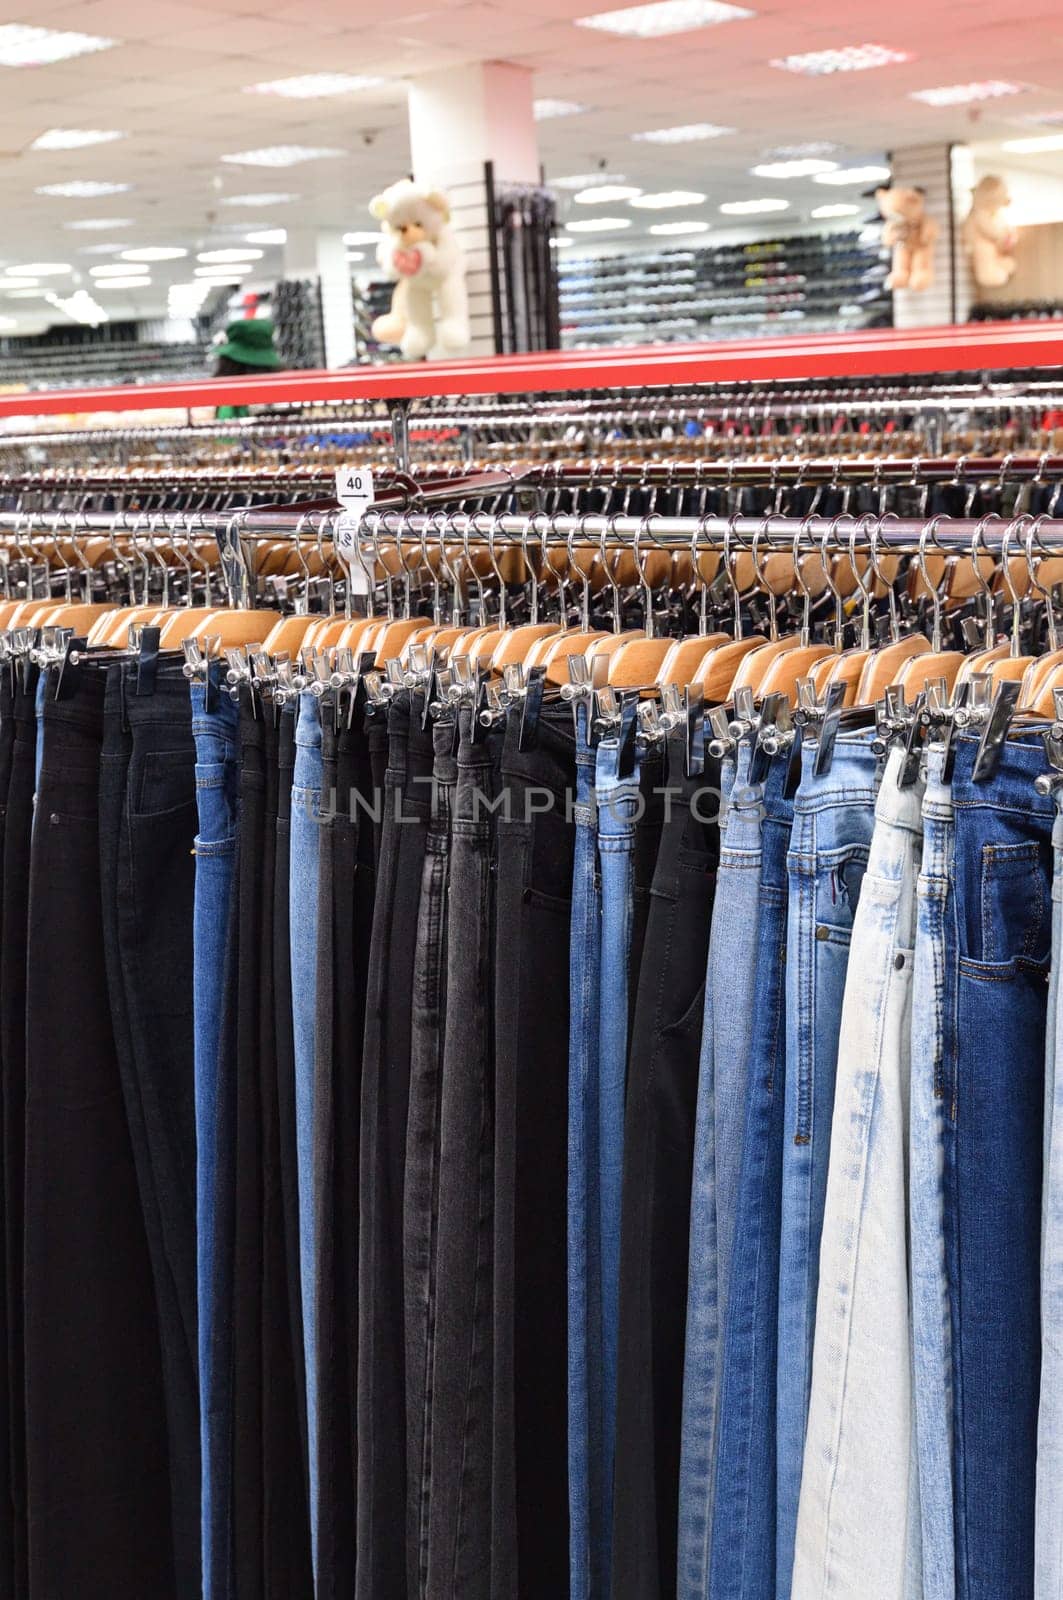 Jeans hanging in a row in a store by olgavolodina